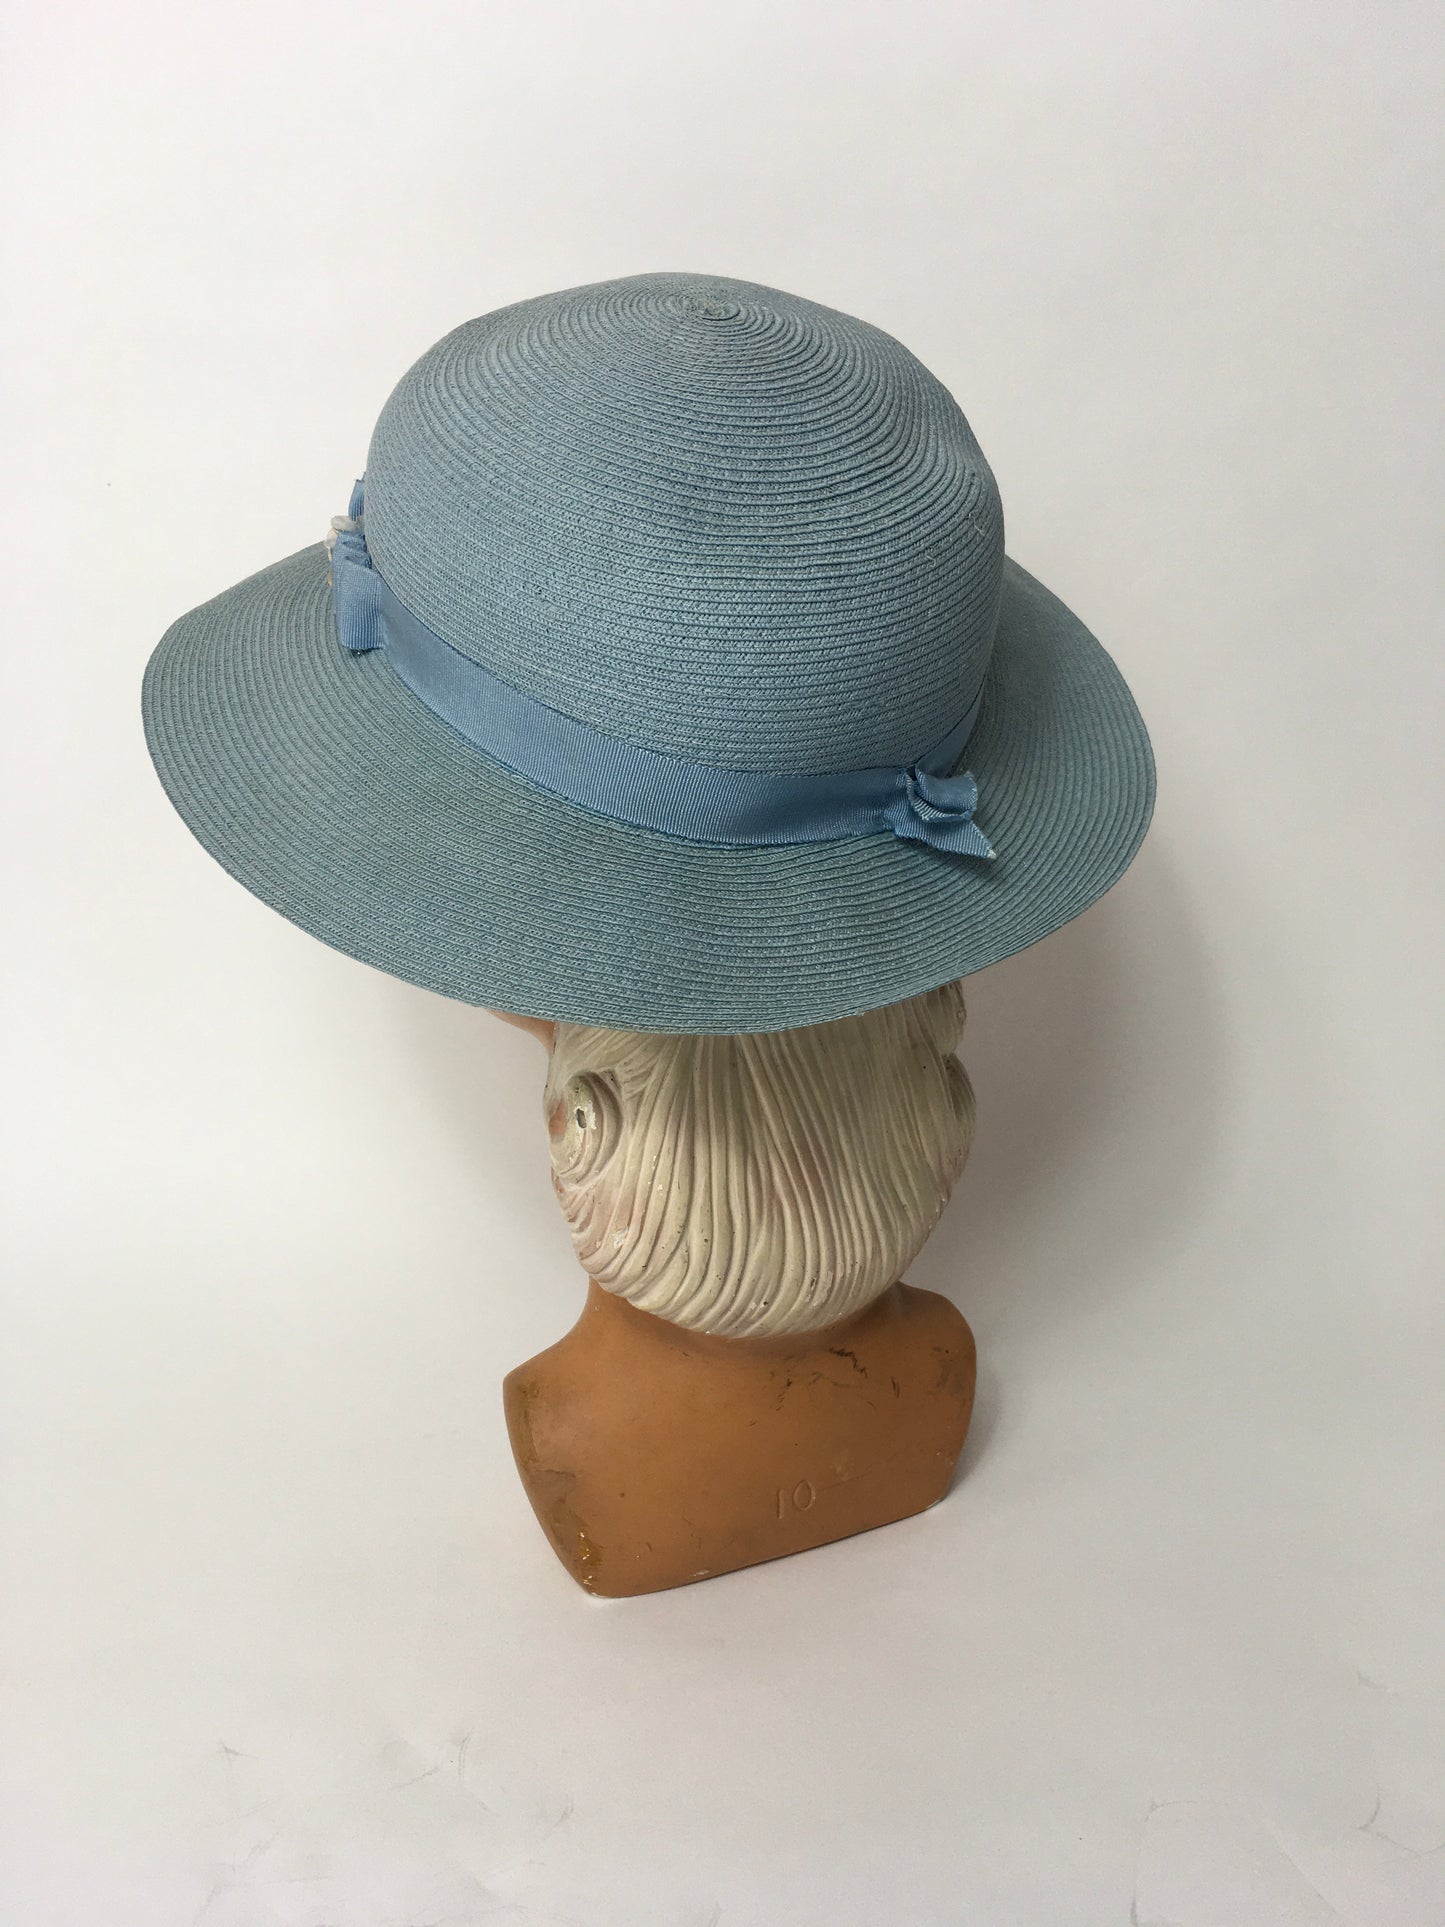 RESERVED FOR B - DO NOT BUY - Original Late 1930’s Cornflower Blue Hat with Original Cream Flowers - Festival of Vintage Fashion Show Exclusive